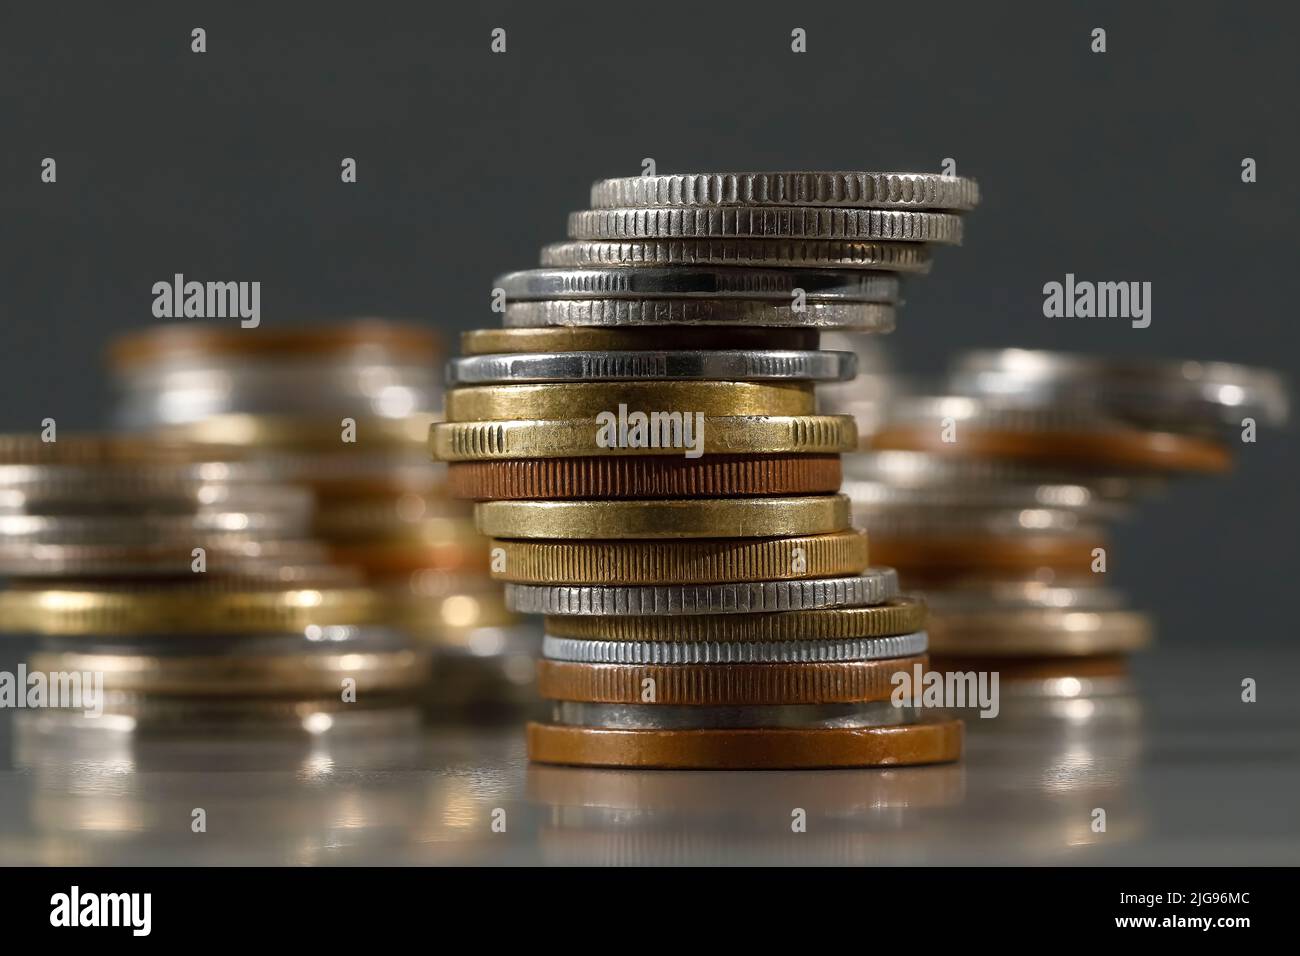 Group of various coins against gray background. Stock Photo